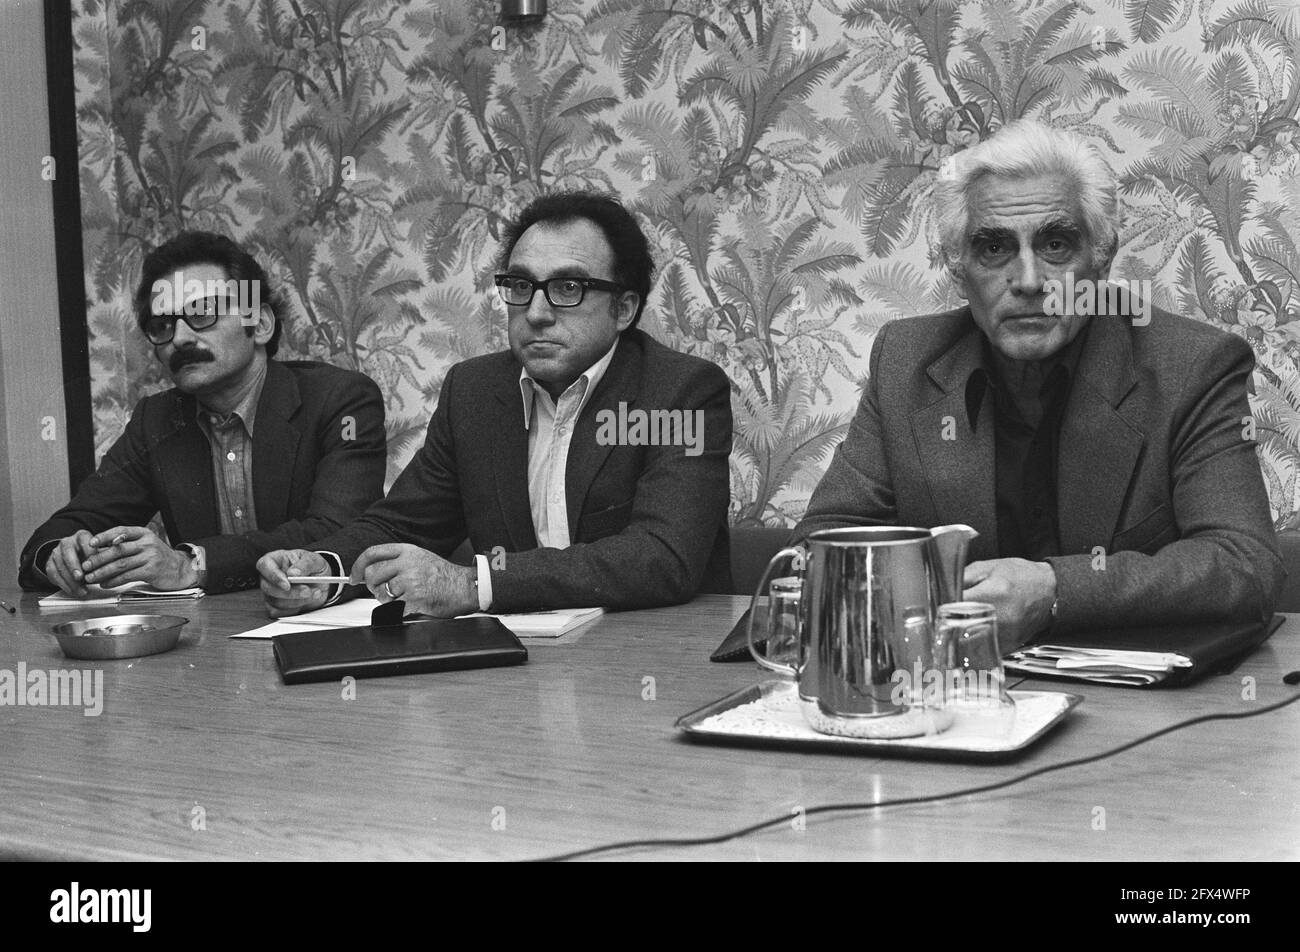 Press conference of the leader of the Portuguese Communist Part ij, Alvaro Cunhal in Krasnapolsky in Amsterdam; vlnr Albano Nunes, Domingos Abrantes and Cunhal, April 17, 1980, press conferences, politicians, The Netherlands, 20th century press agency photo, news to remember, documentary, historic photography 1945-1990, visual stories, human history of the Twentieth Century, capturing moments in time Stock Photo